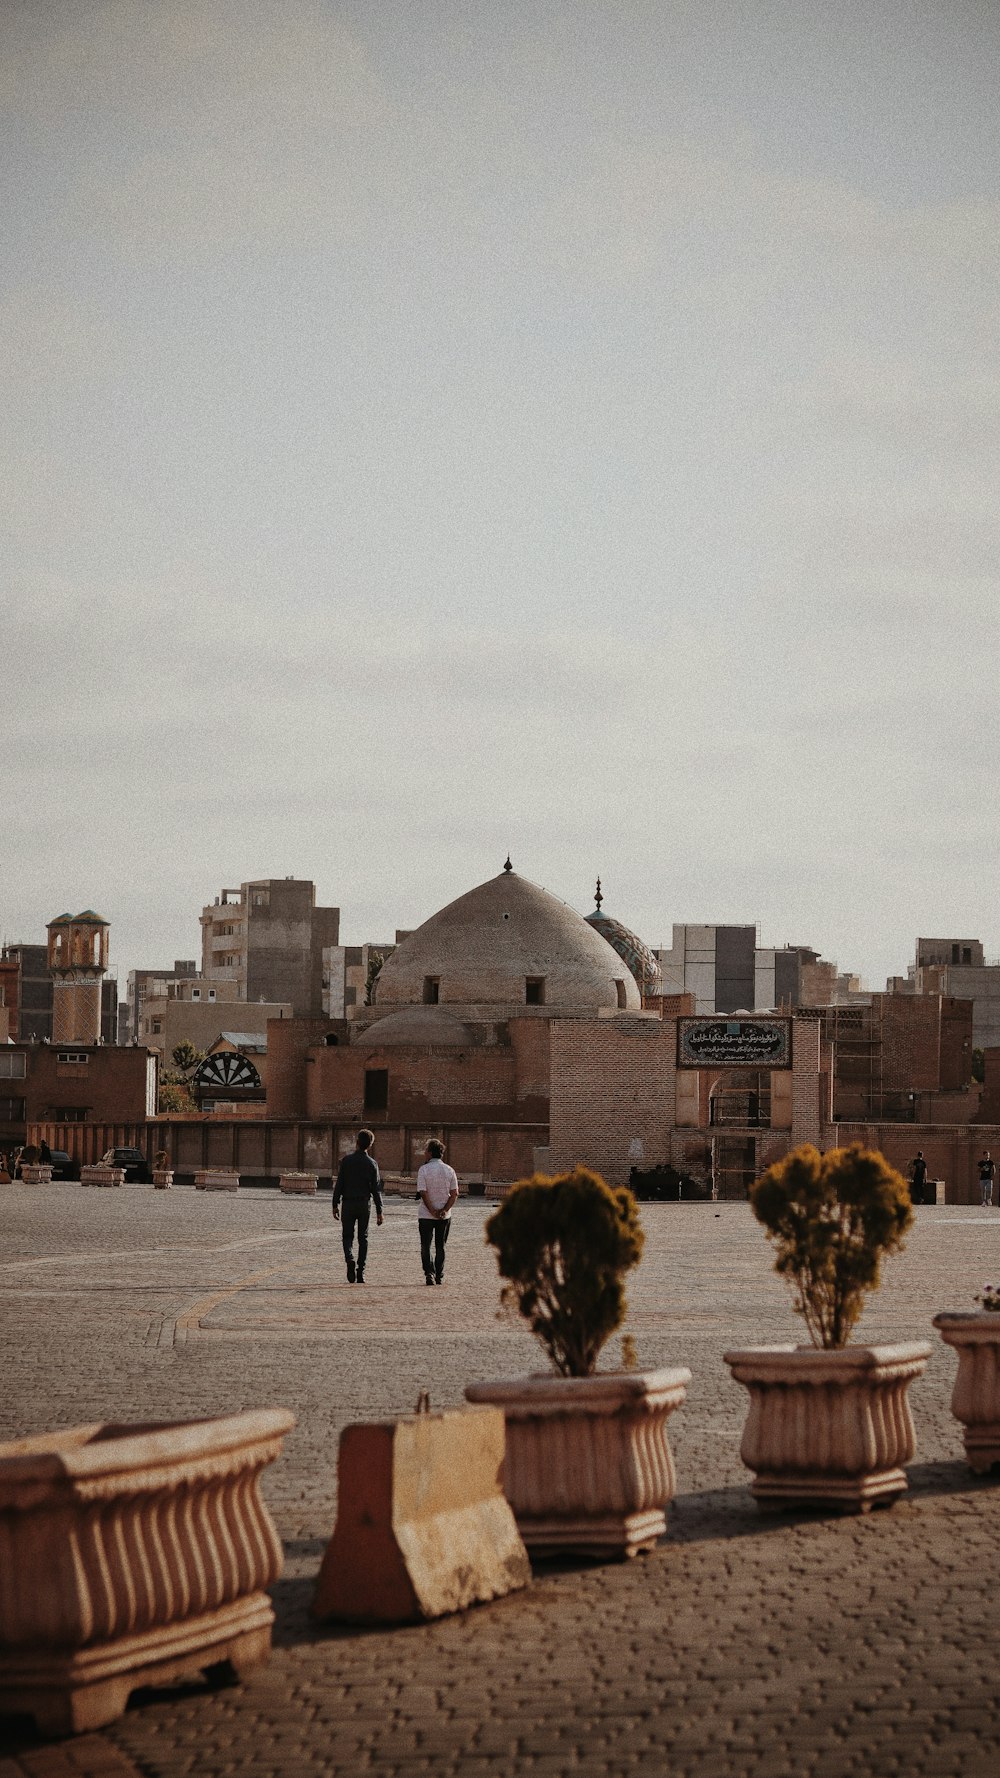 a group of people walking in a courtyard with a domed building in the background